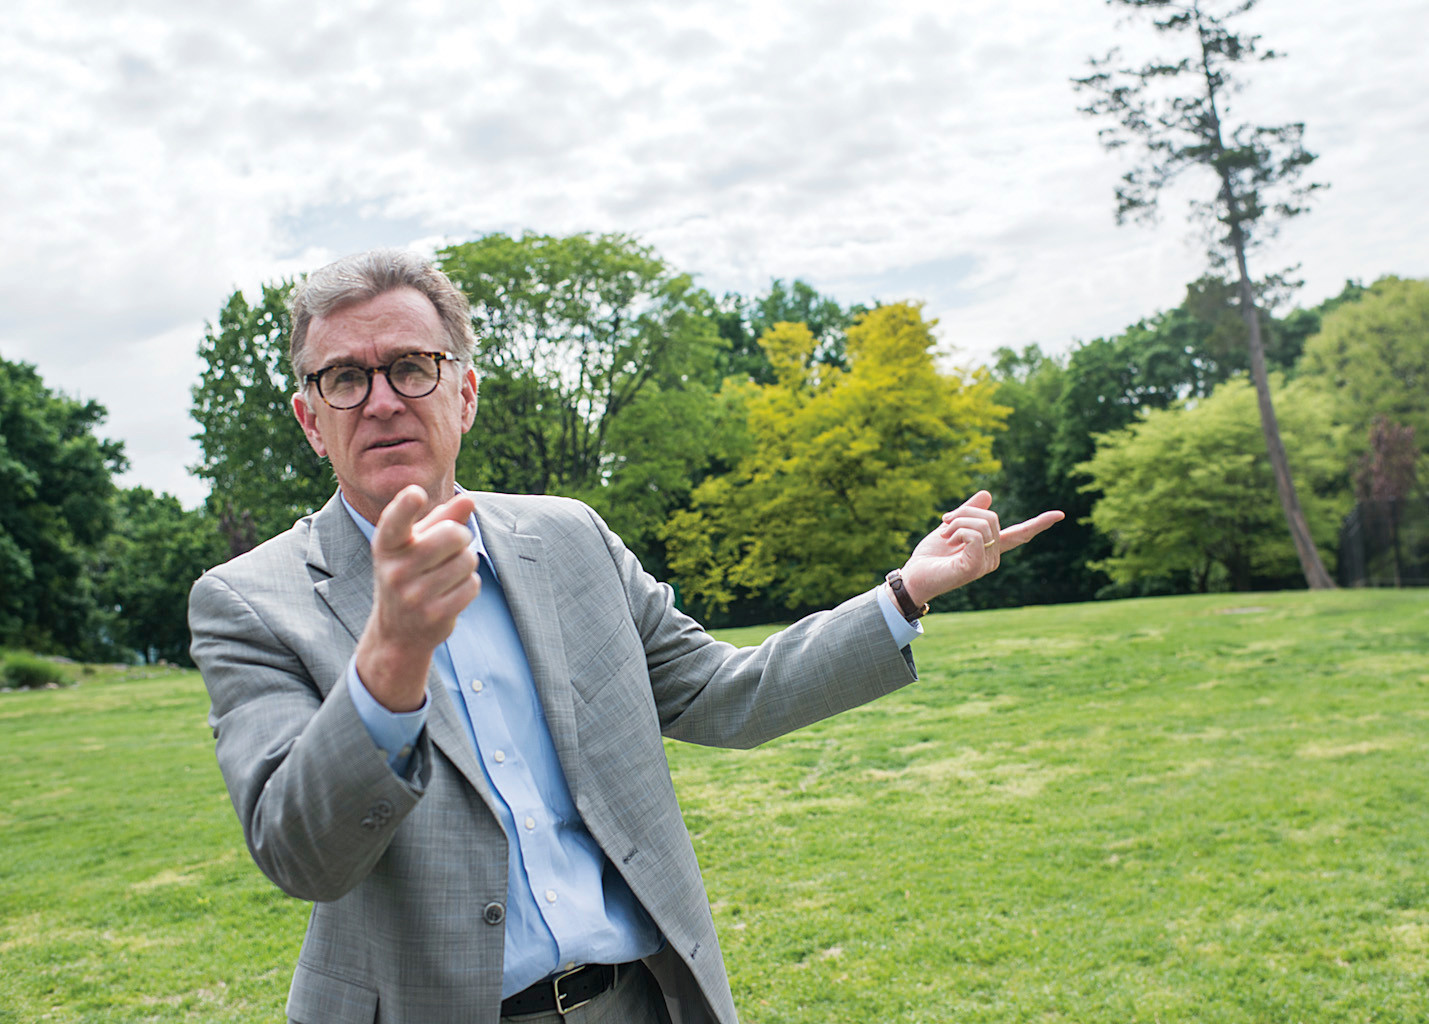 Volunter chairman of the Untermyer Gardens Conservancy, Stephen Byrns, gives a tour of the Walled Gardens.